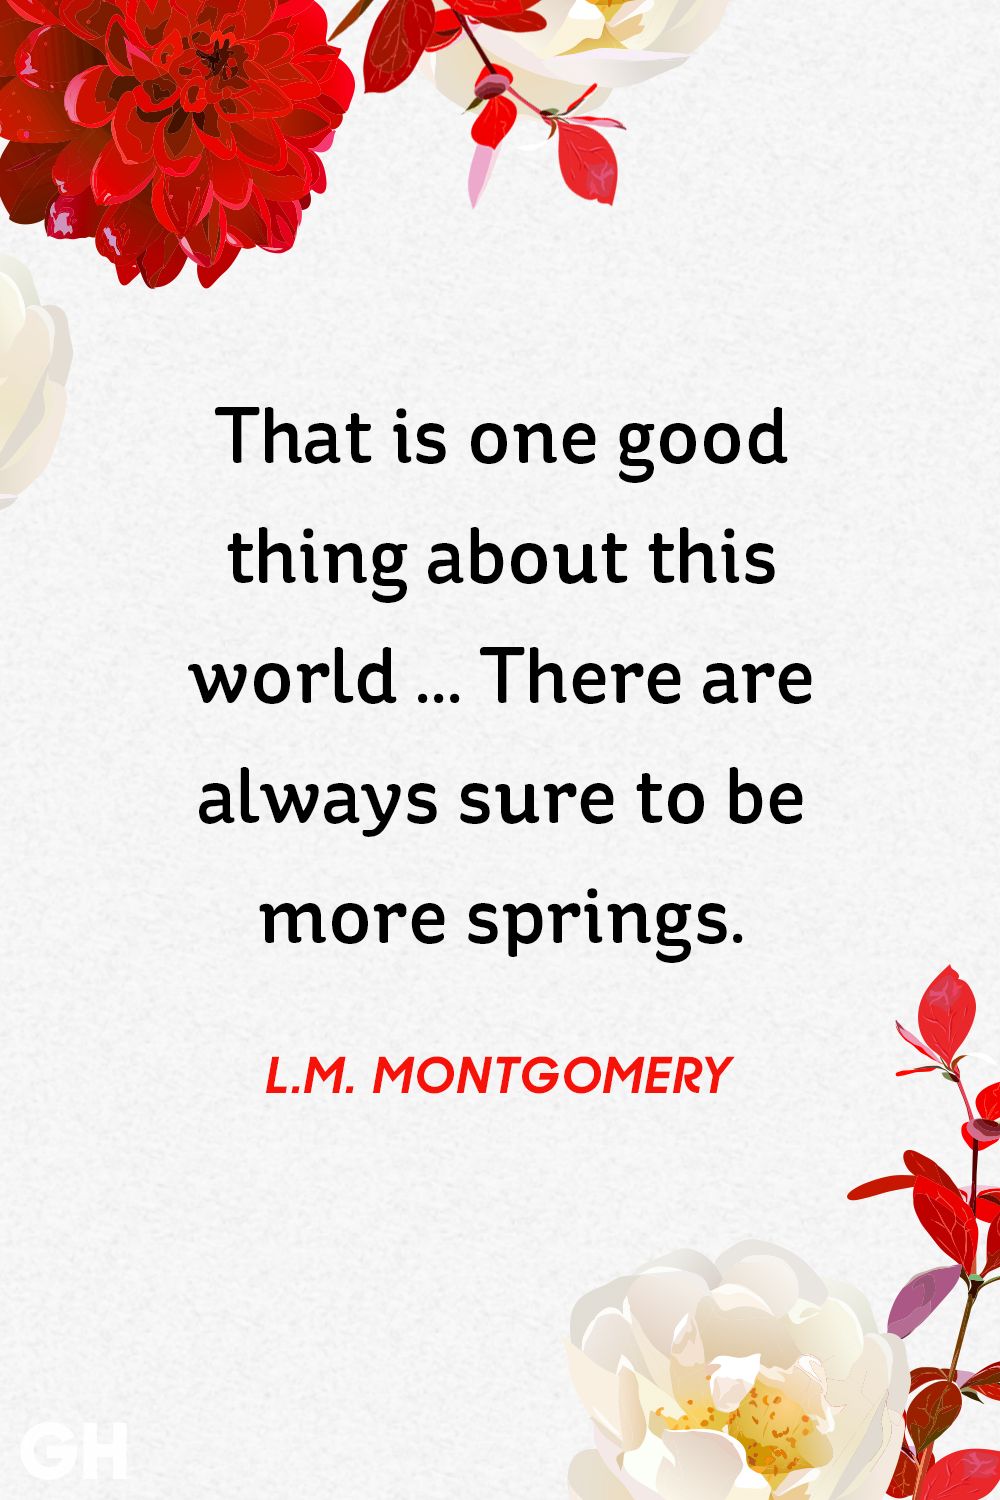 20 Happy Spring Quotes Sayings About Spring And Flowers